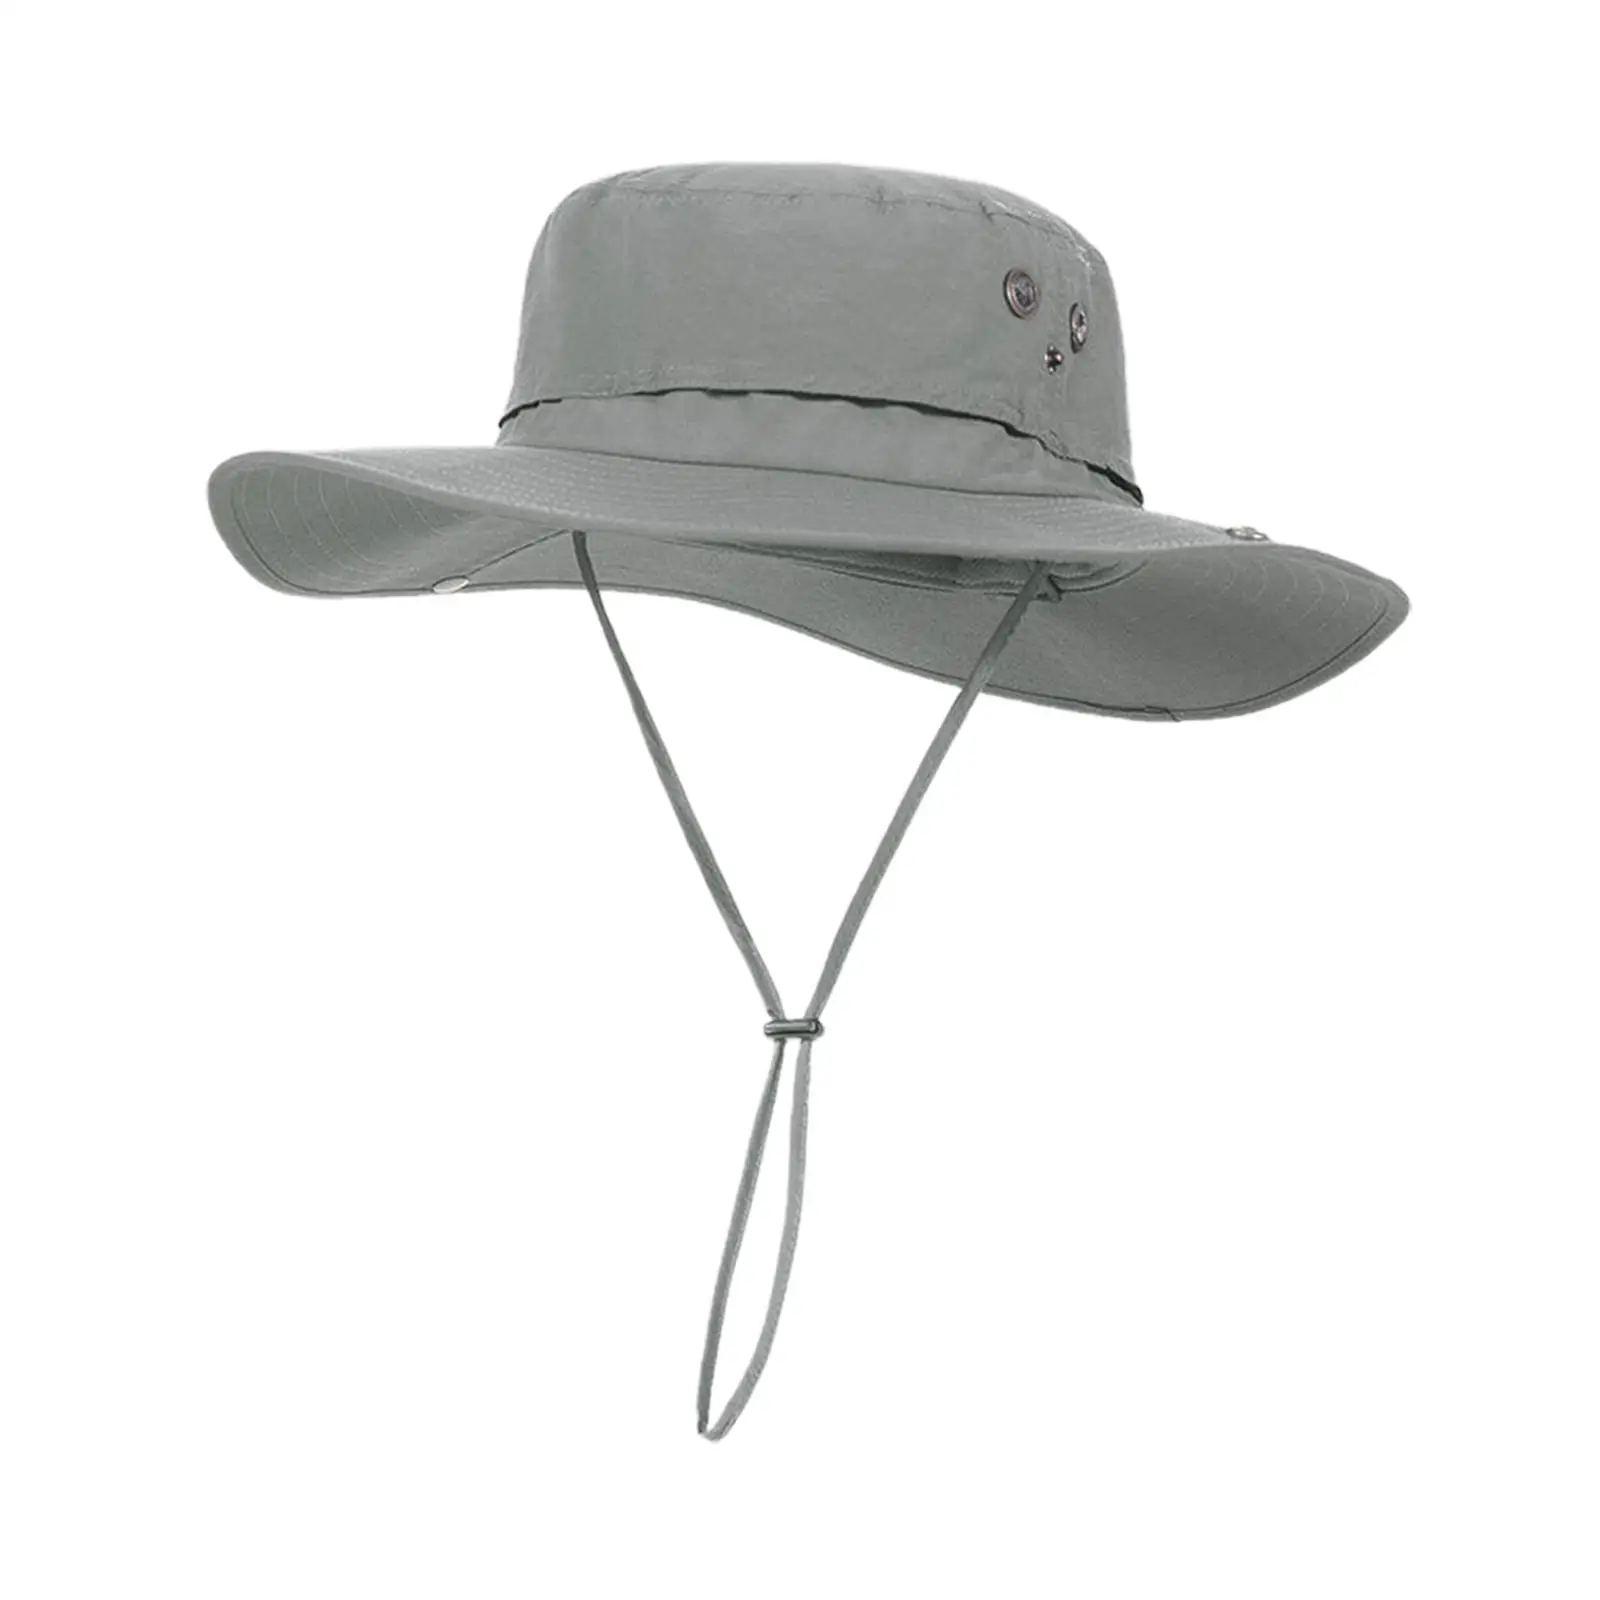 Bucket Sunhat Adjustable Waterproof with Strings Wide Protection Hat for Hiking Summer Outdoor Women Men Adult